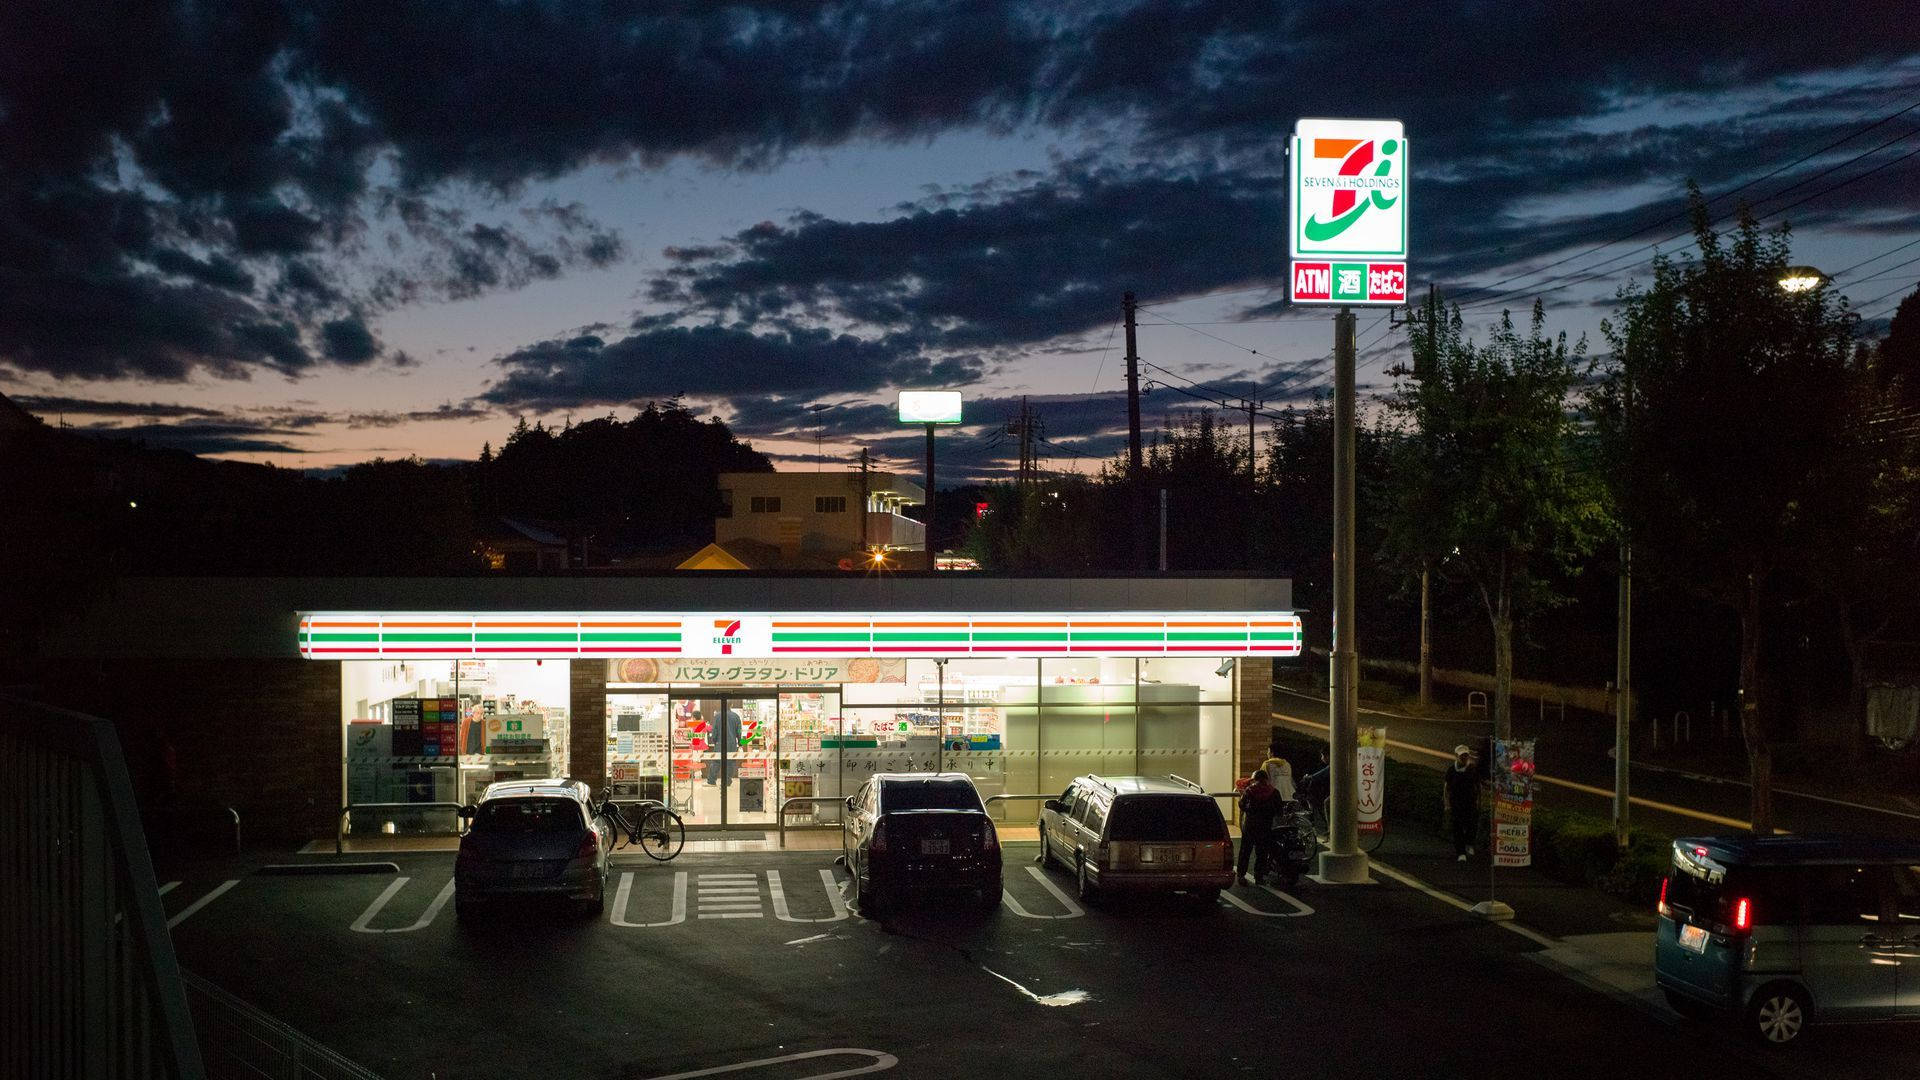 7 Eleven Store At Sunset Background